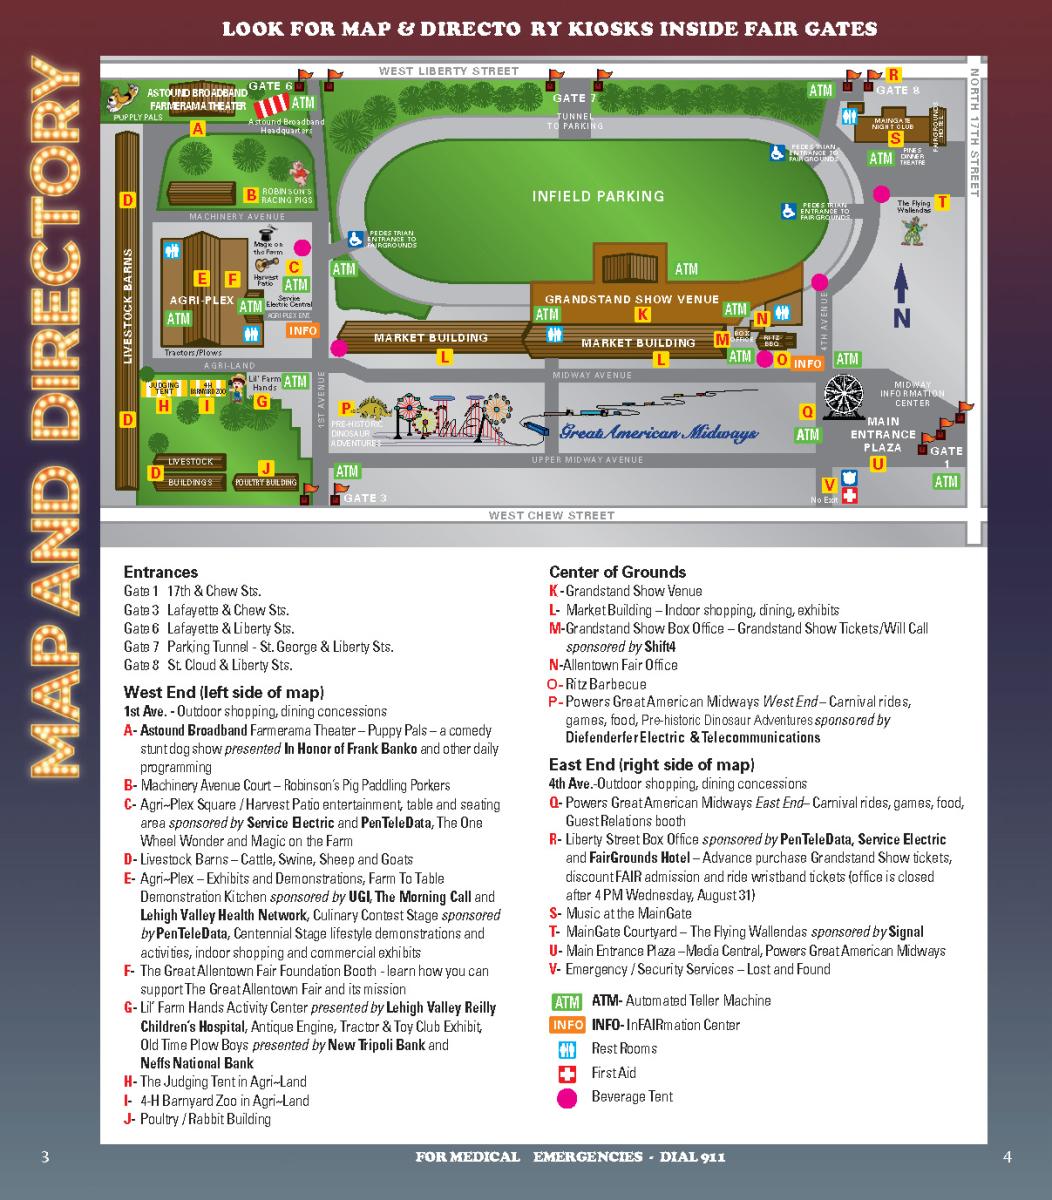 A map of the Great Allentown Fair